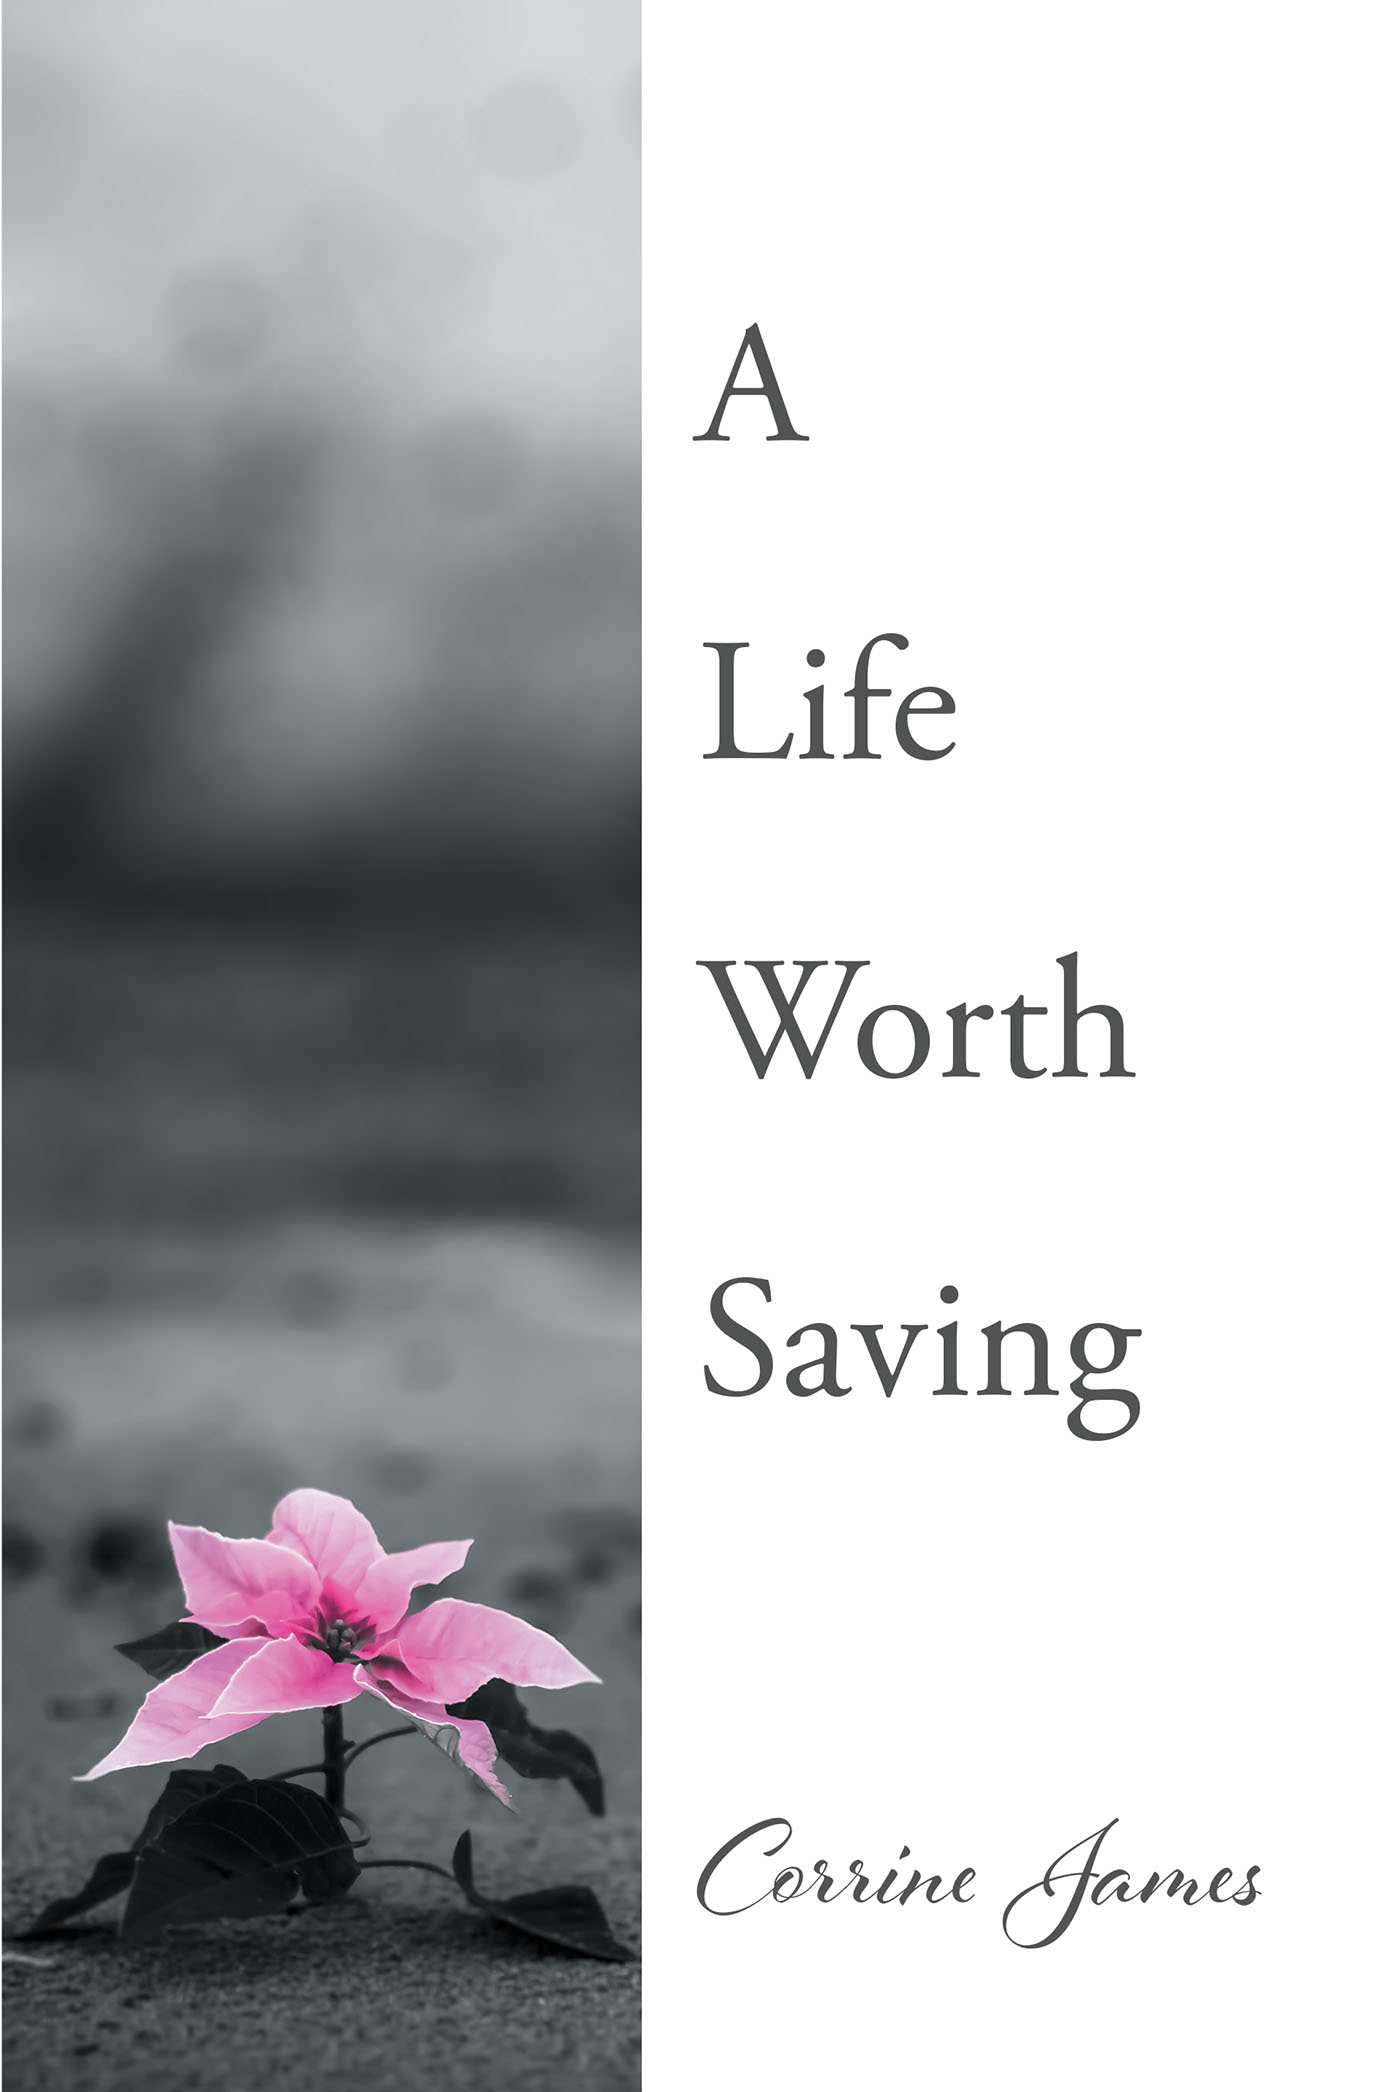 Corrine James’s Newly Released "A Life Worth Saving" is a Potent Story of Salvation as the Author Shares a Moving Story of Spiritual Growth